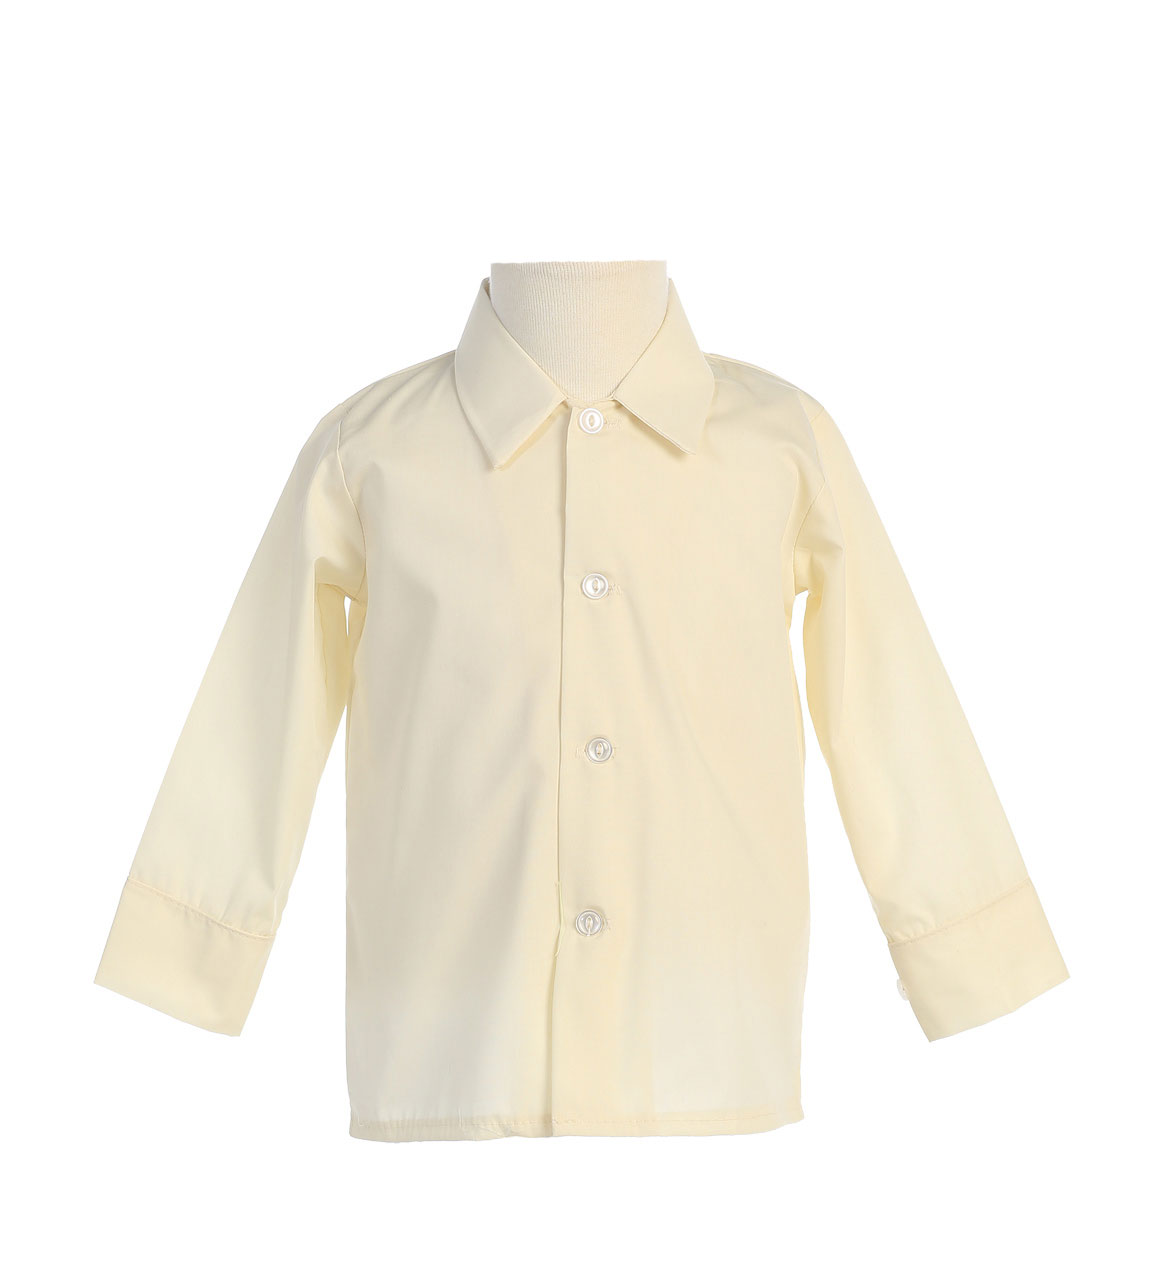 Boys Long Sleeved Simple Dress Shirt - Available in Ivory 3T